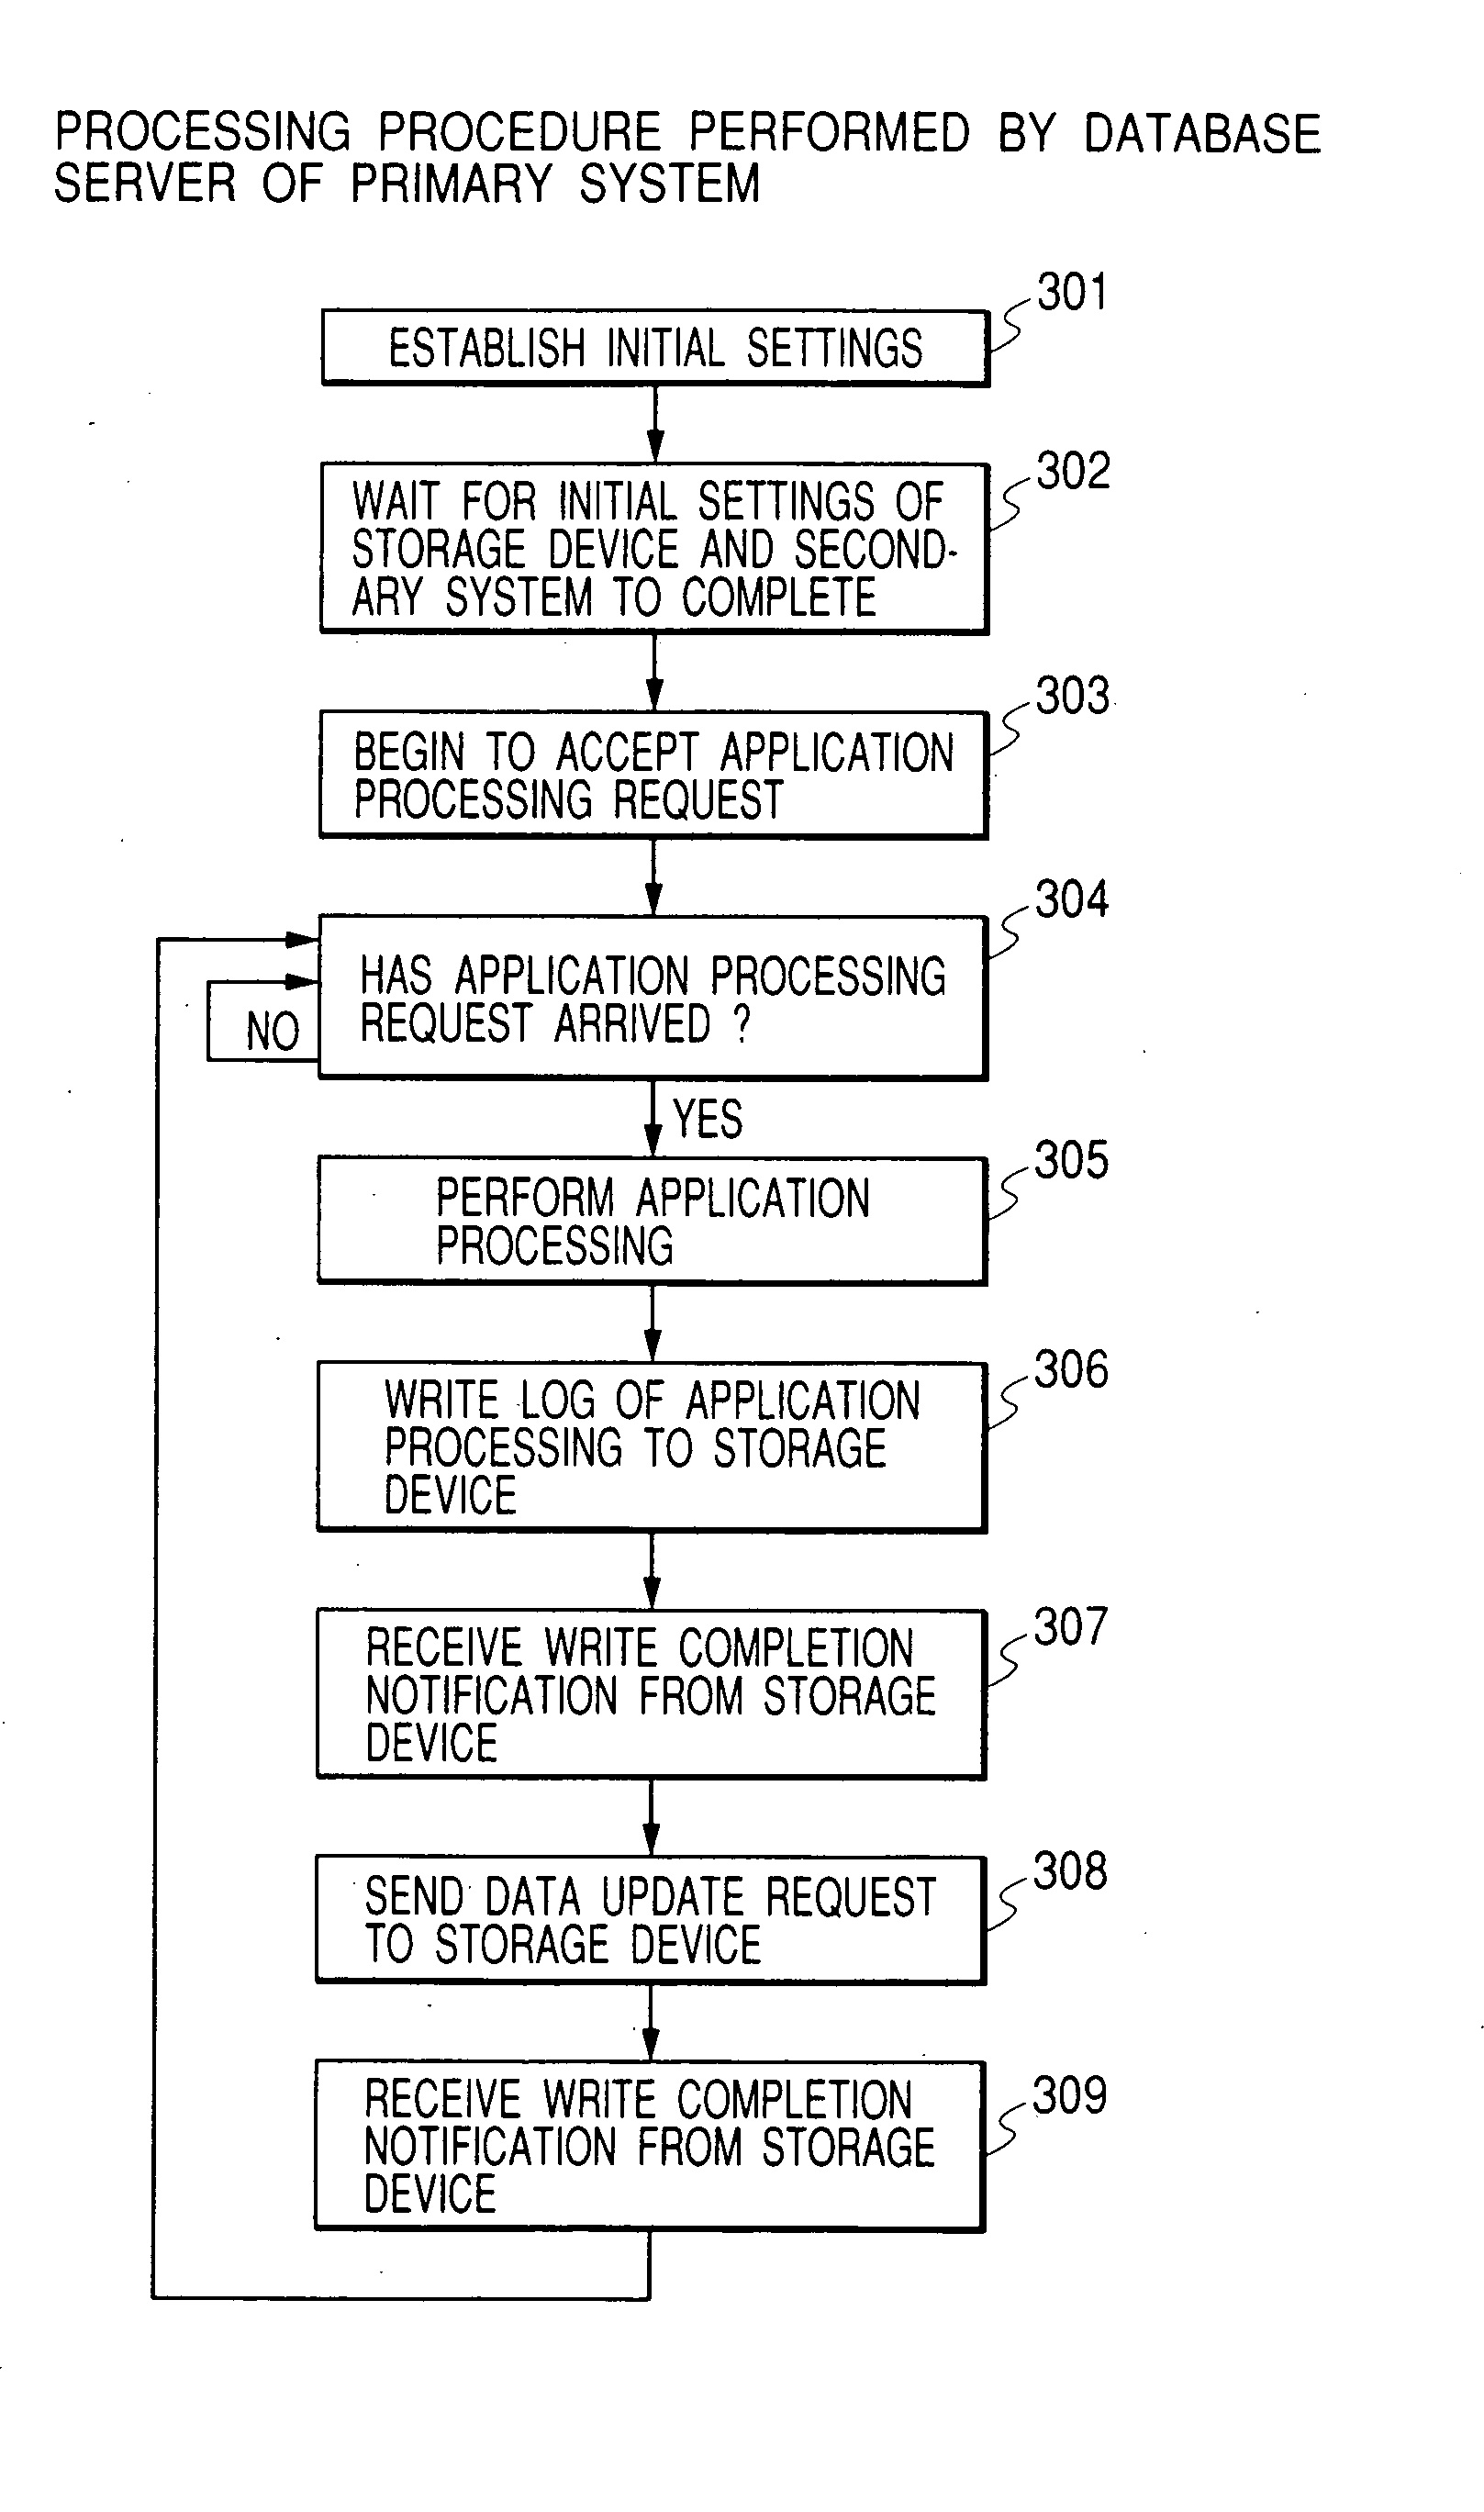 Data control method for duplicating data between computer systems